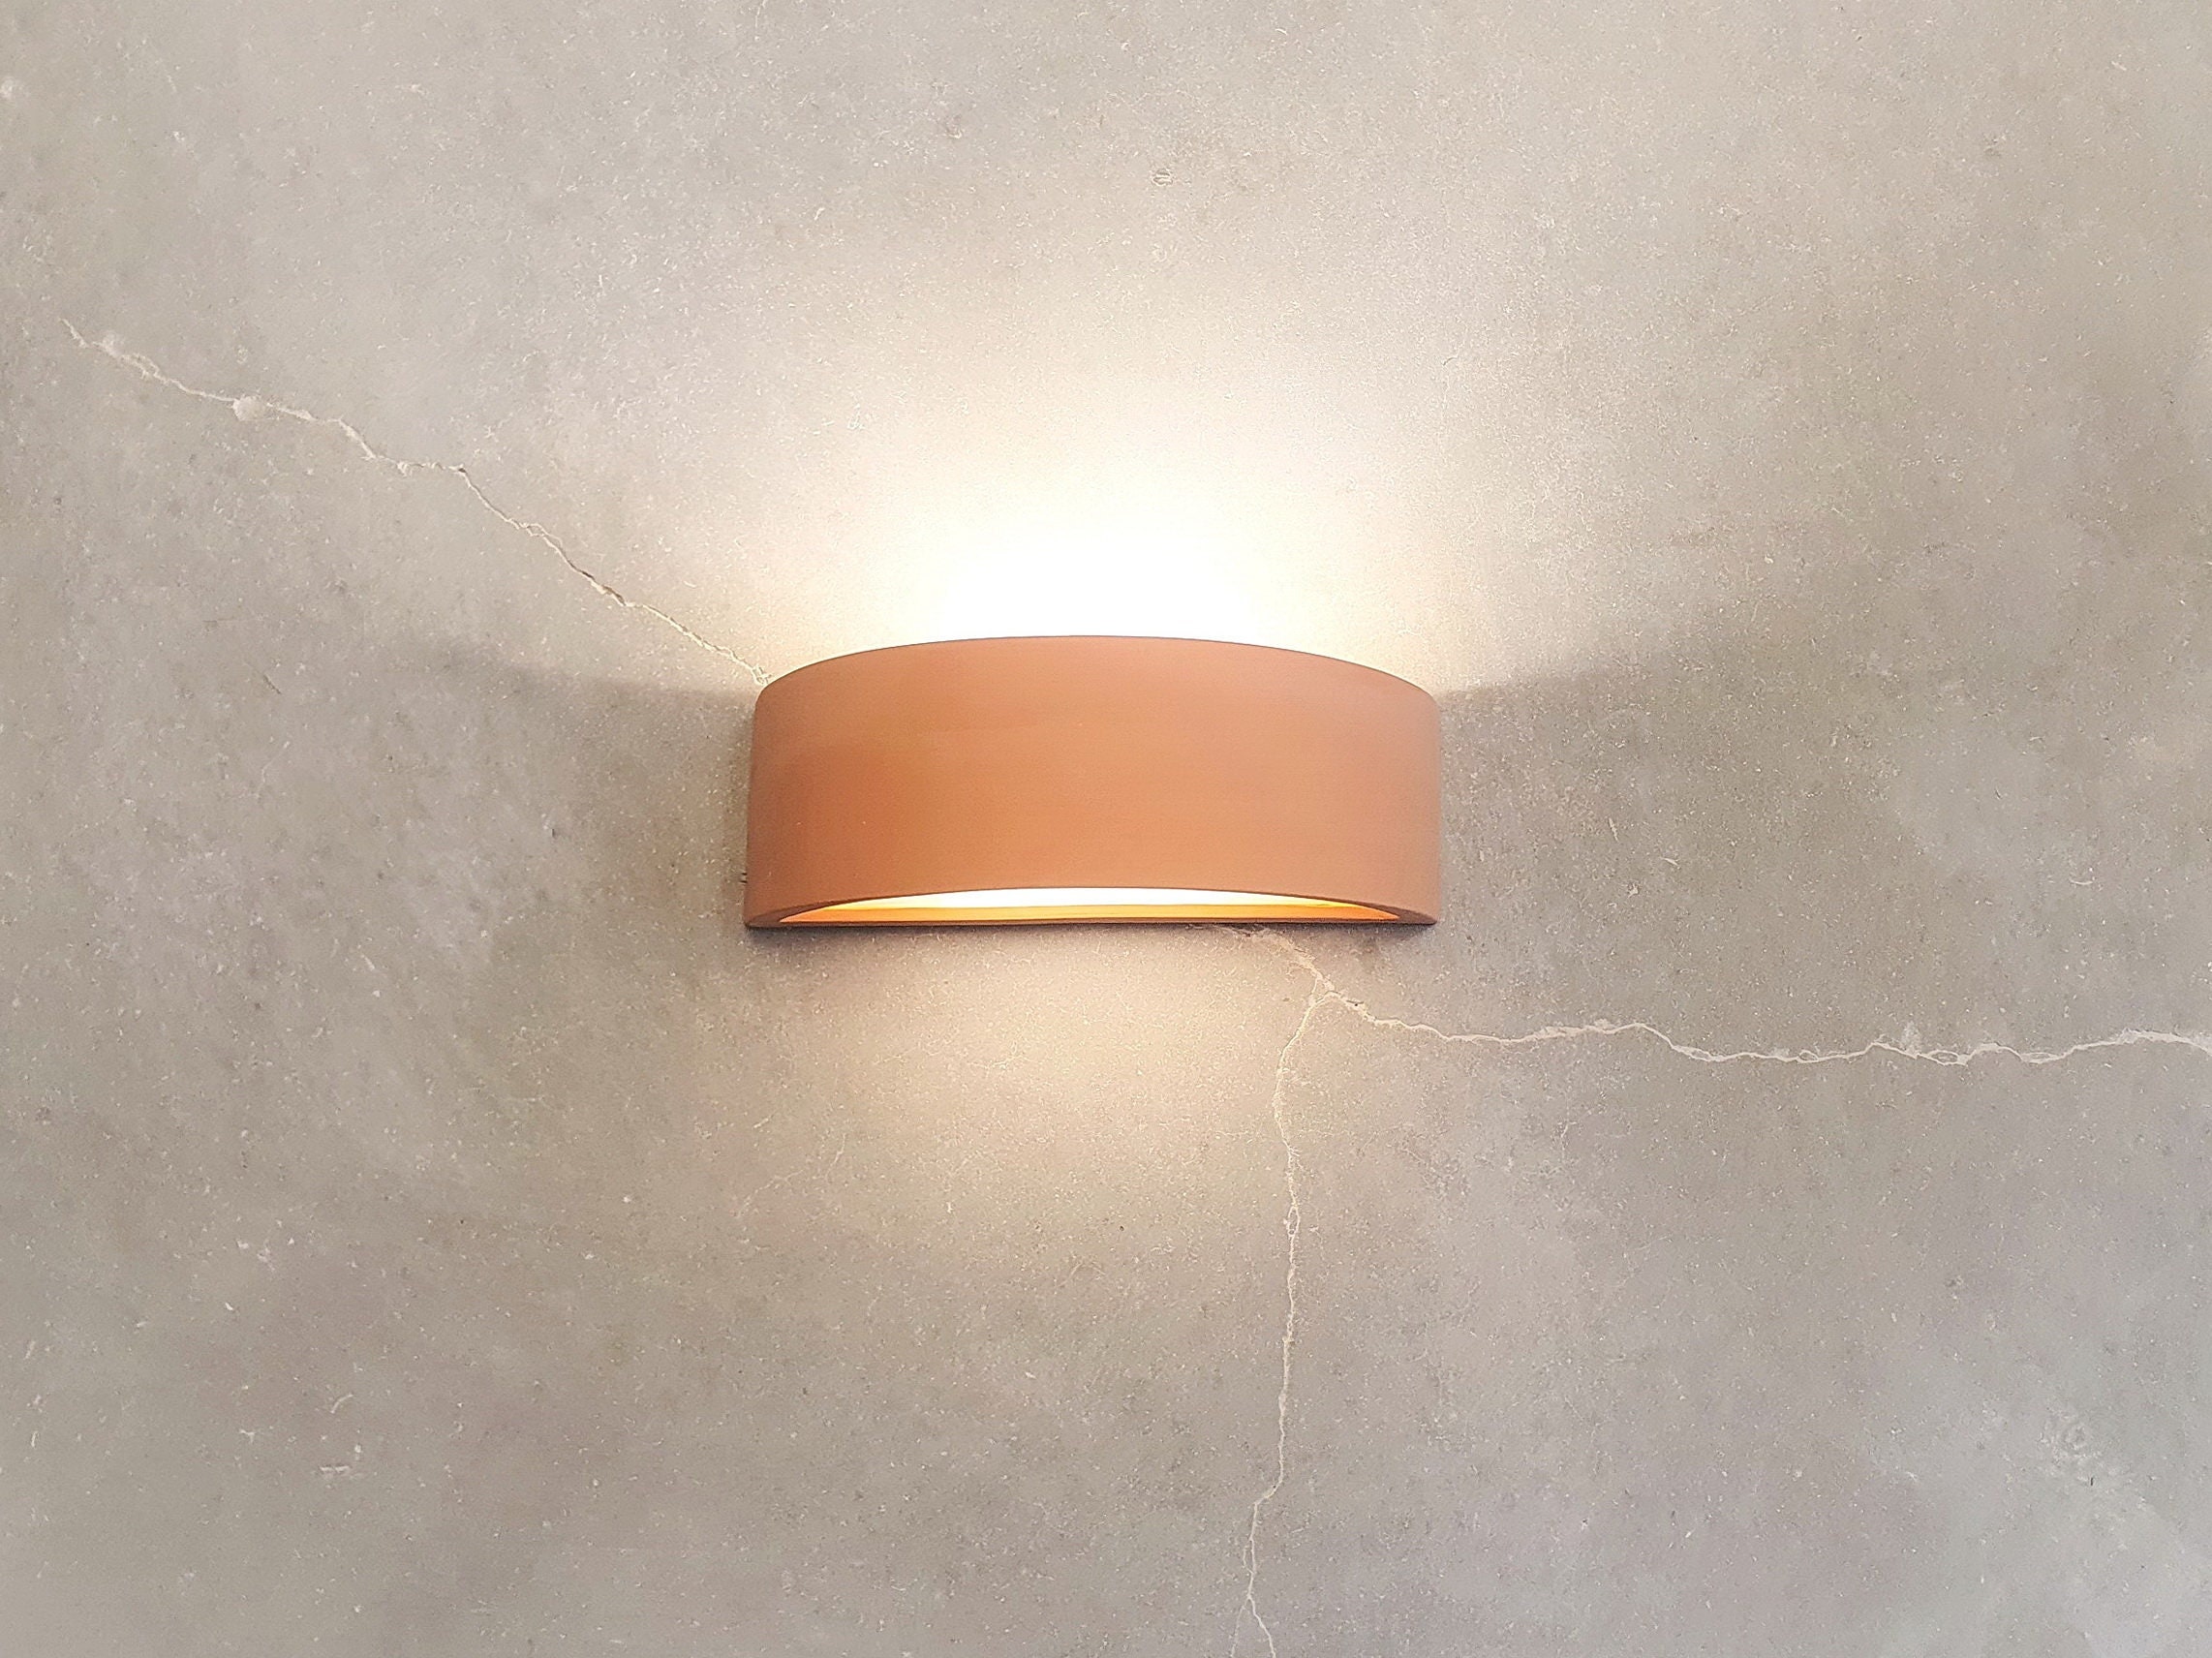 Wall Decorative Wall Wall Fixture Mount Shades ,ceramic Lamp - Terracotta Light. Sconce , ,arch Wall Wall Shape Sconce, Etsy Light